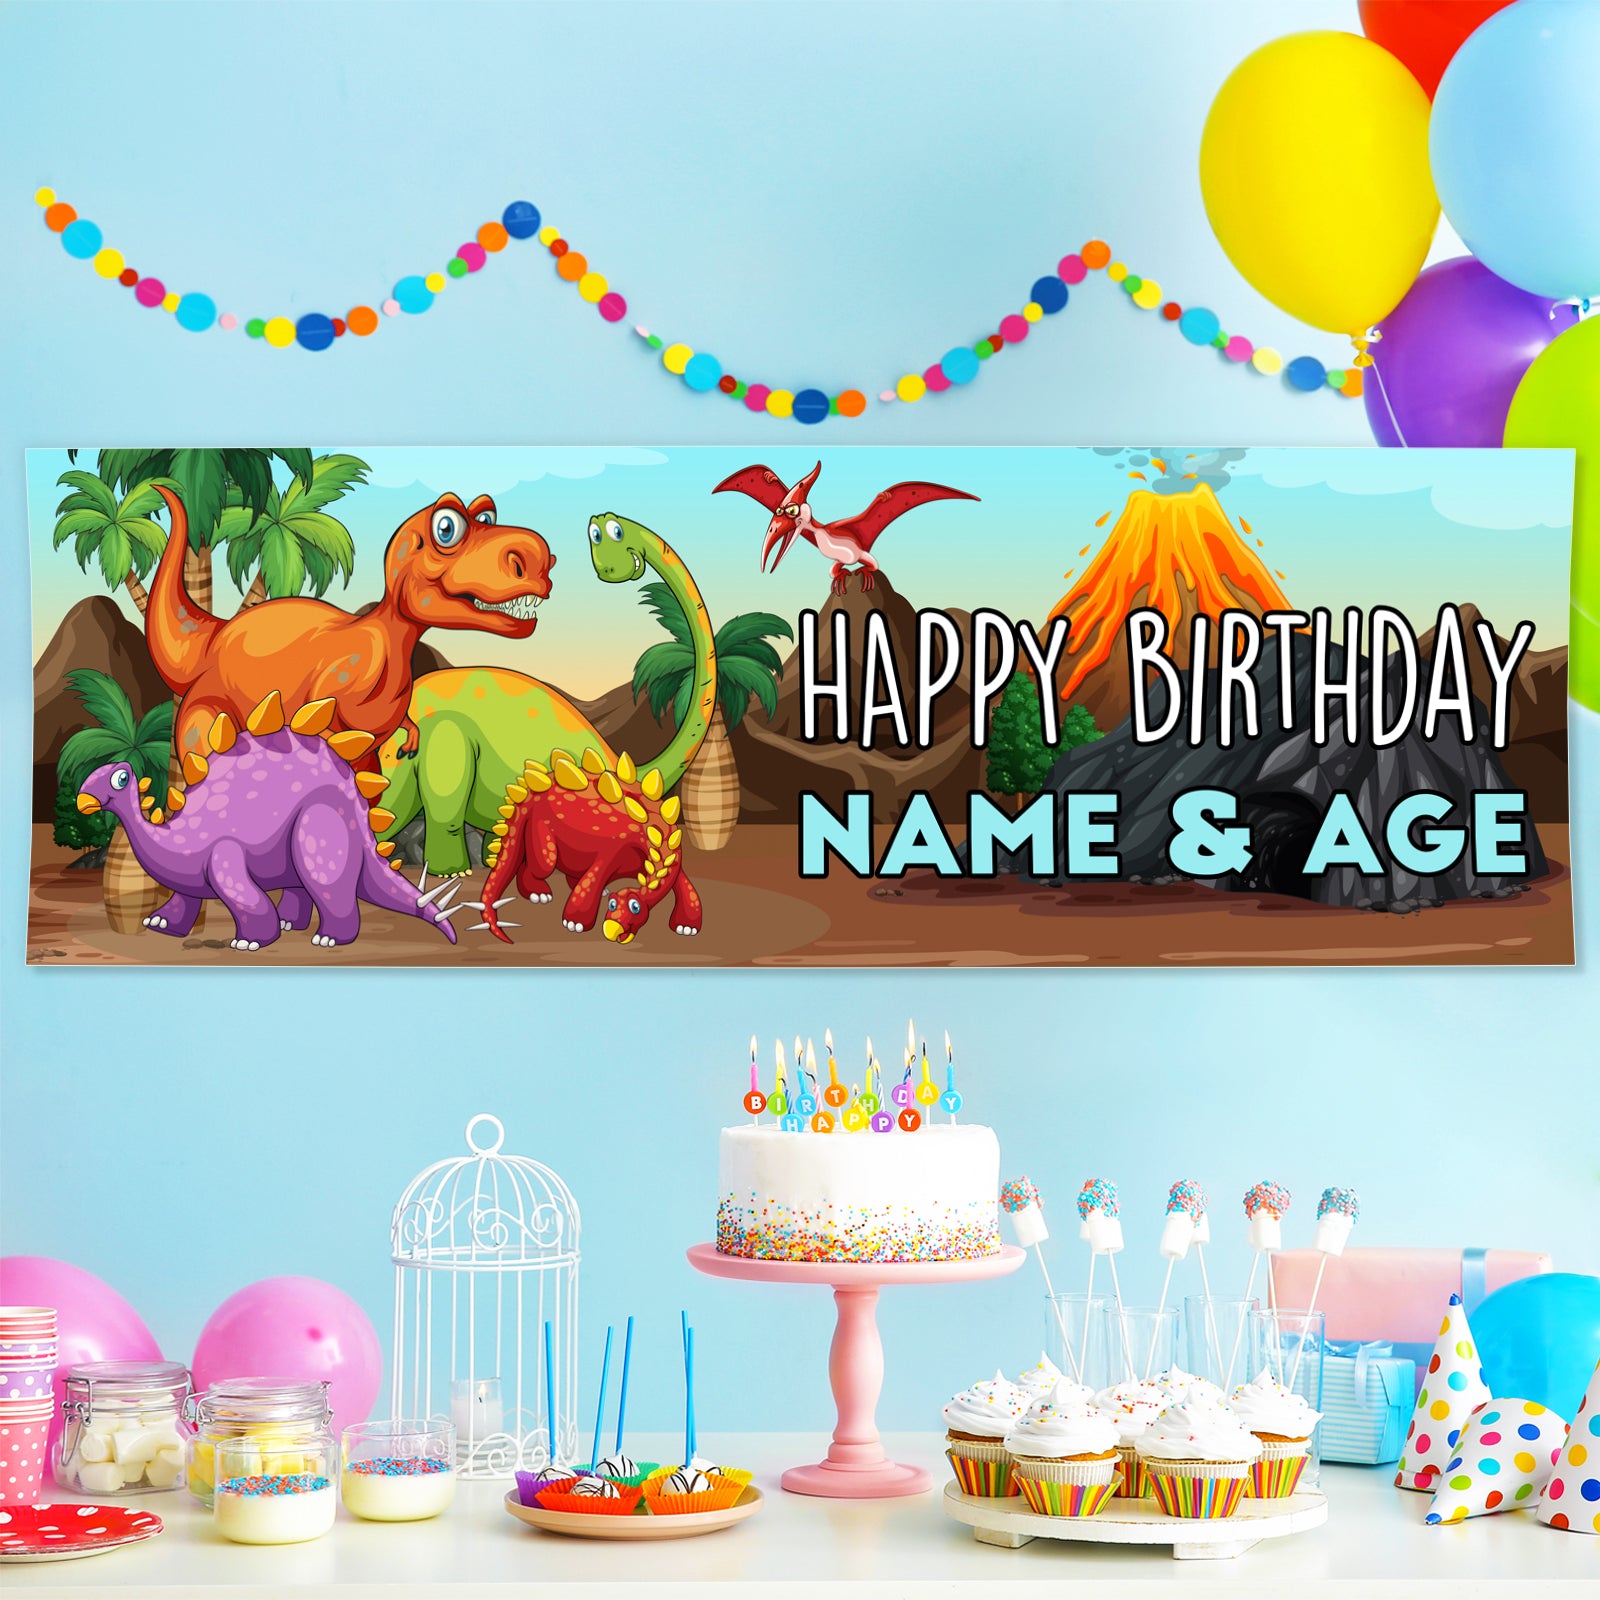 Kids Birthday Banners With Name in Dinosaur Design 2